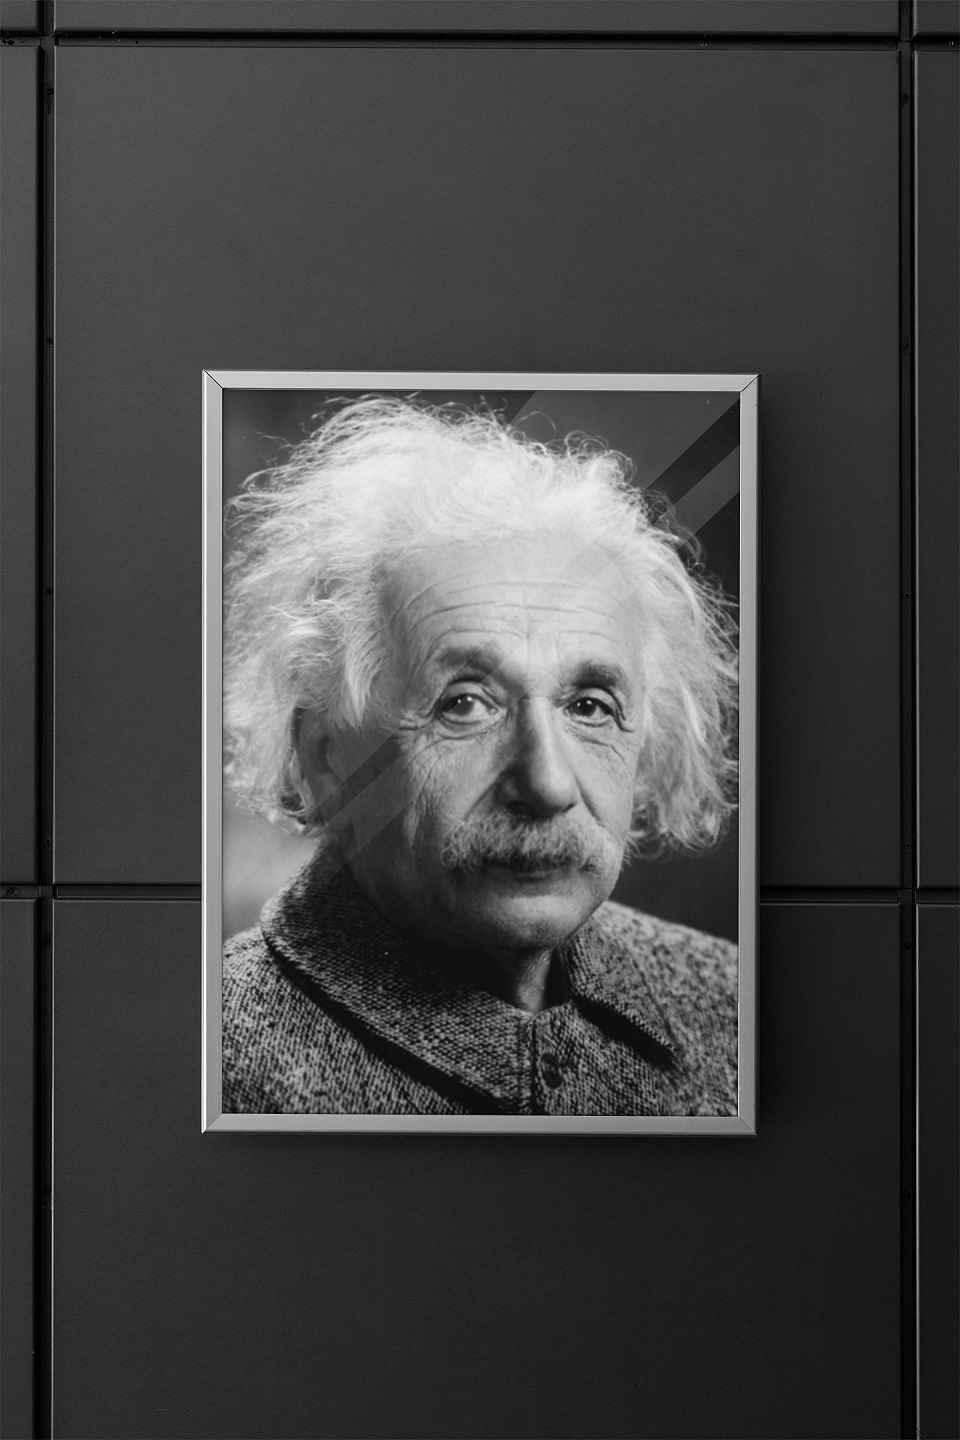 Poster case containing an Einstein poster mounted on a modern wall.